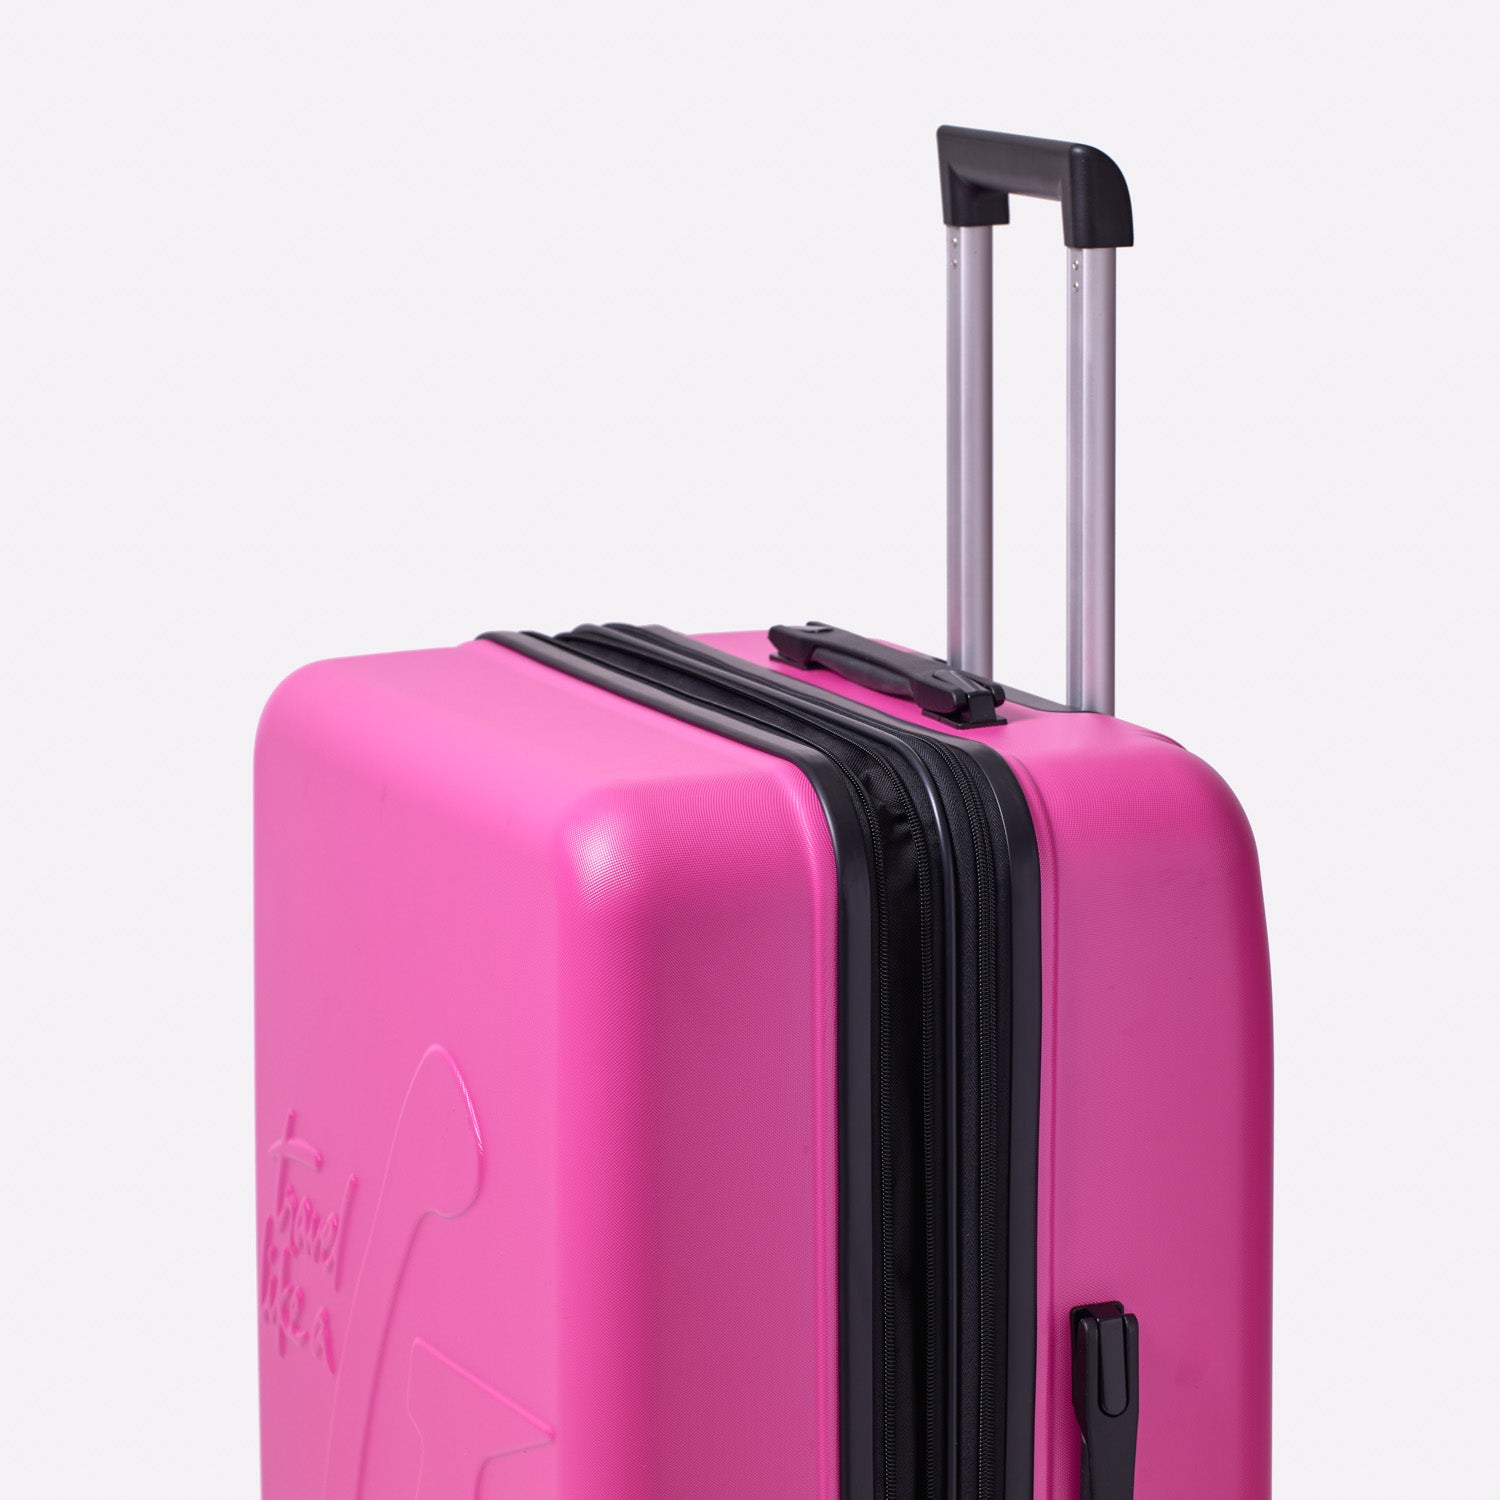 LARGE CHECKED LUGGAGE HOT PINK